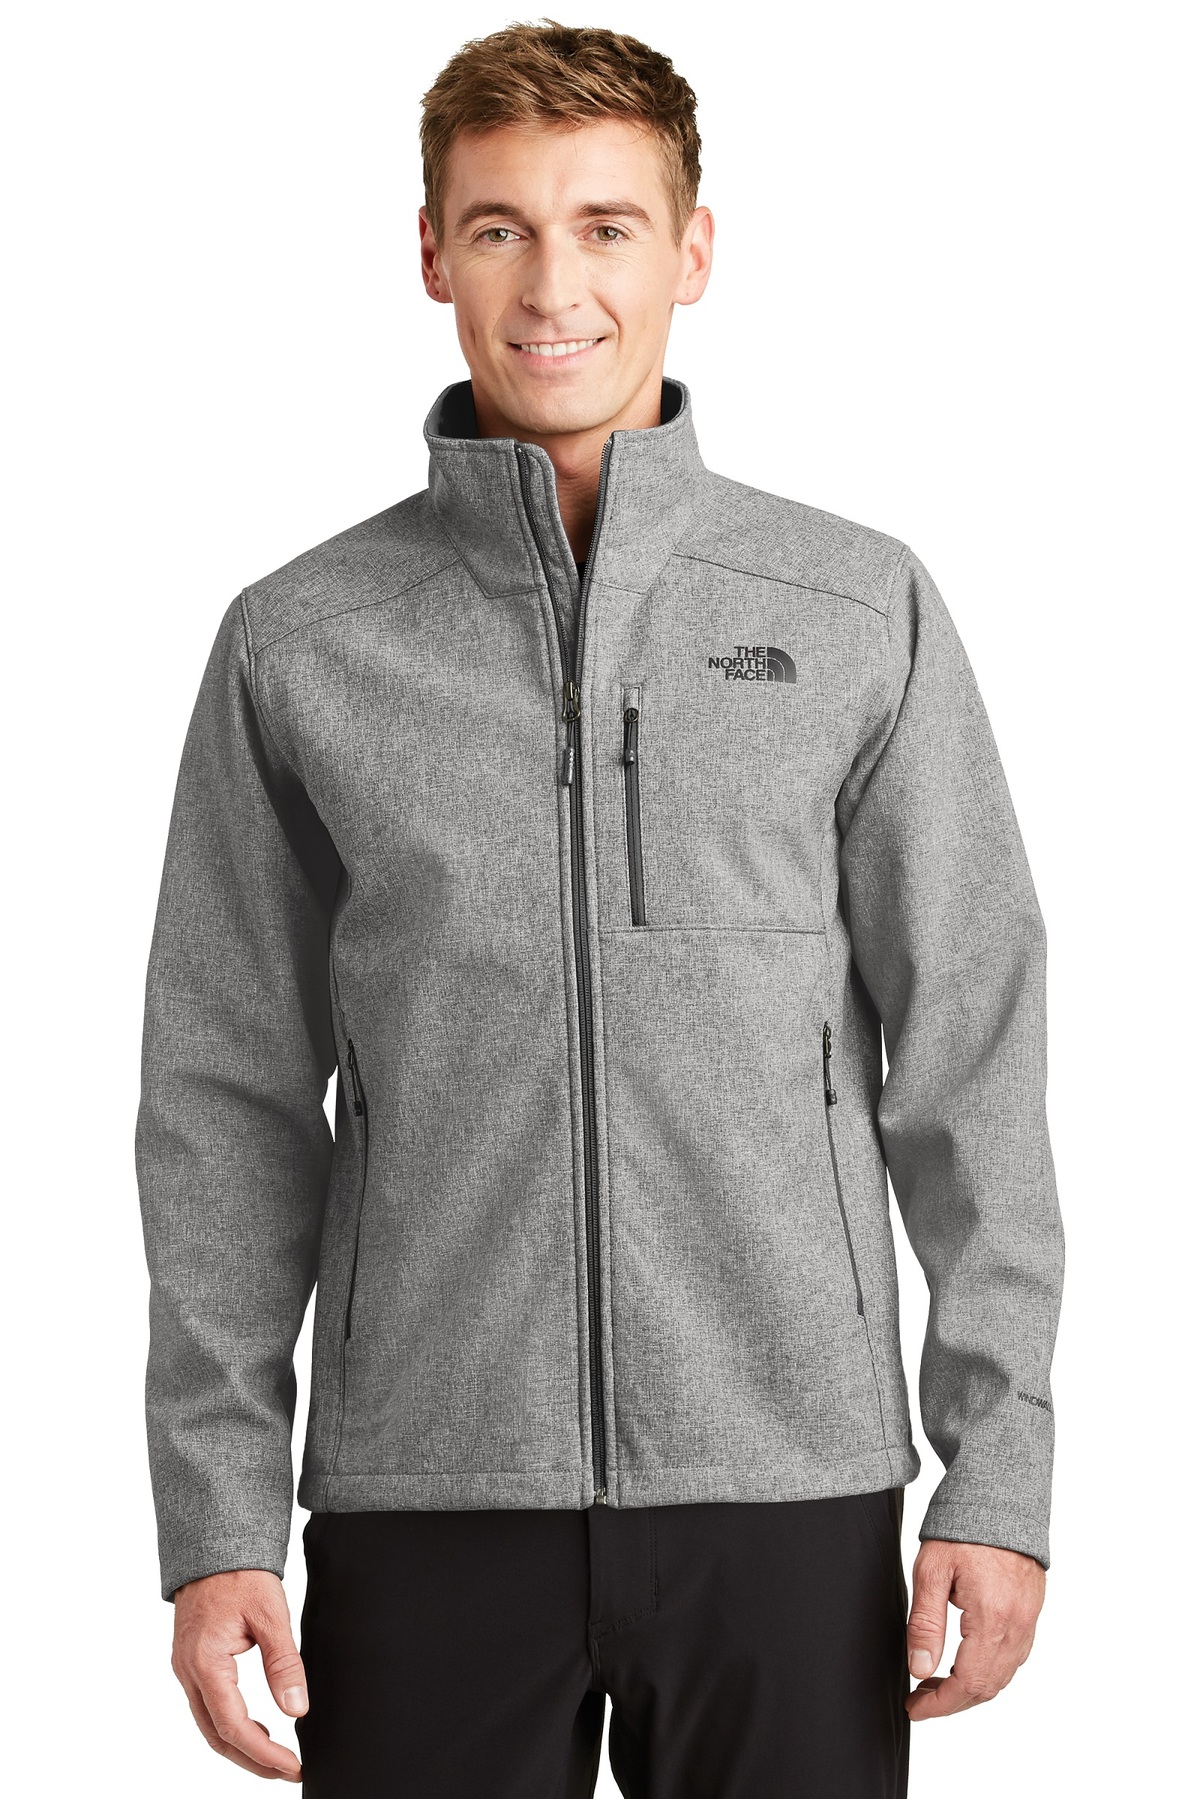 The North Face Embroidered Men's Apex Barrier Soft Shell Jacket | The